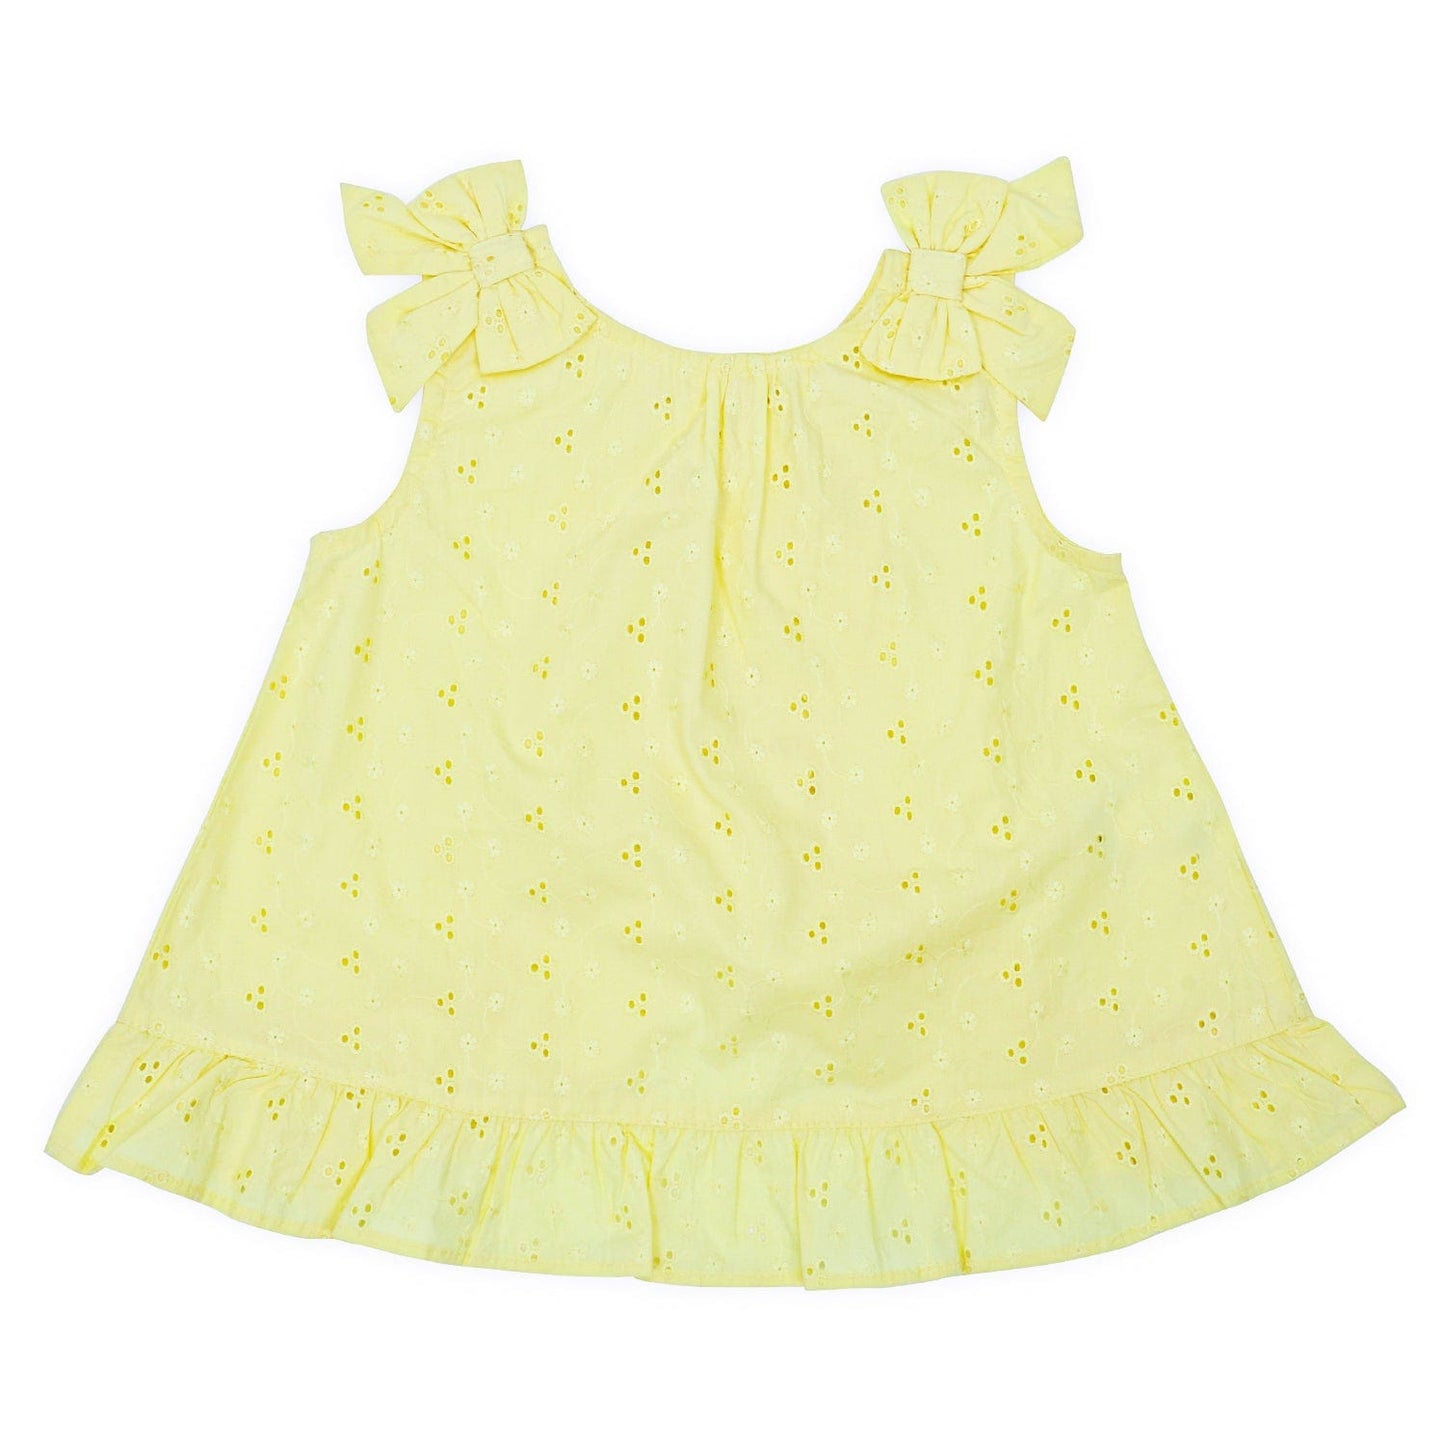 Dewy Daffodil Cross over back peplum frock and bloomer set, Green 0-24 months